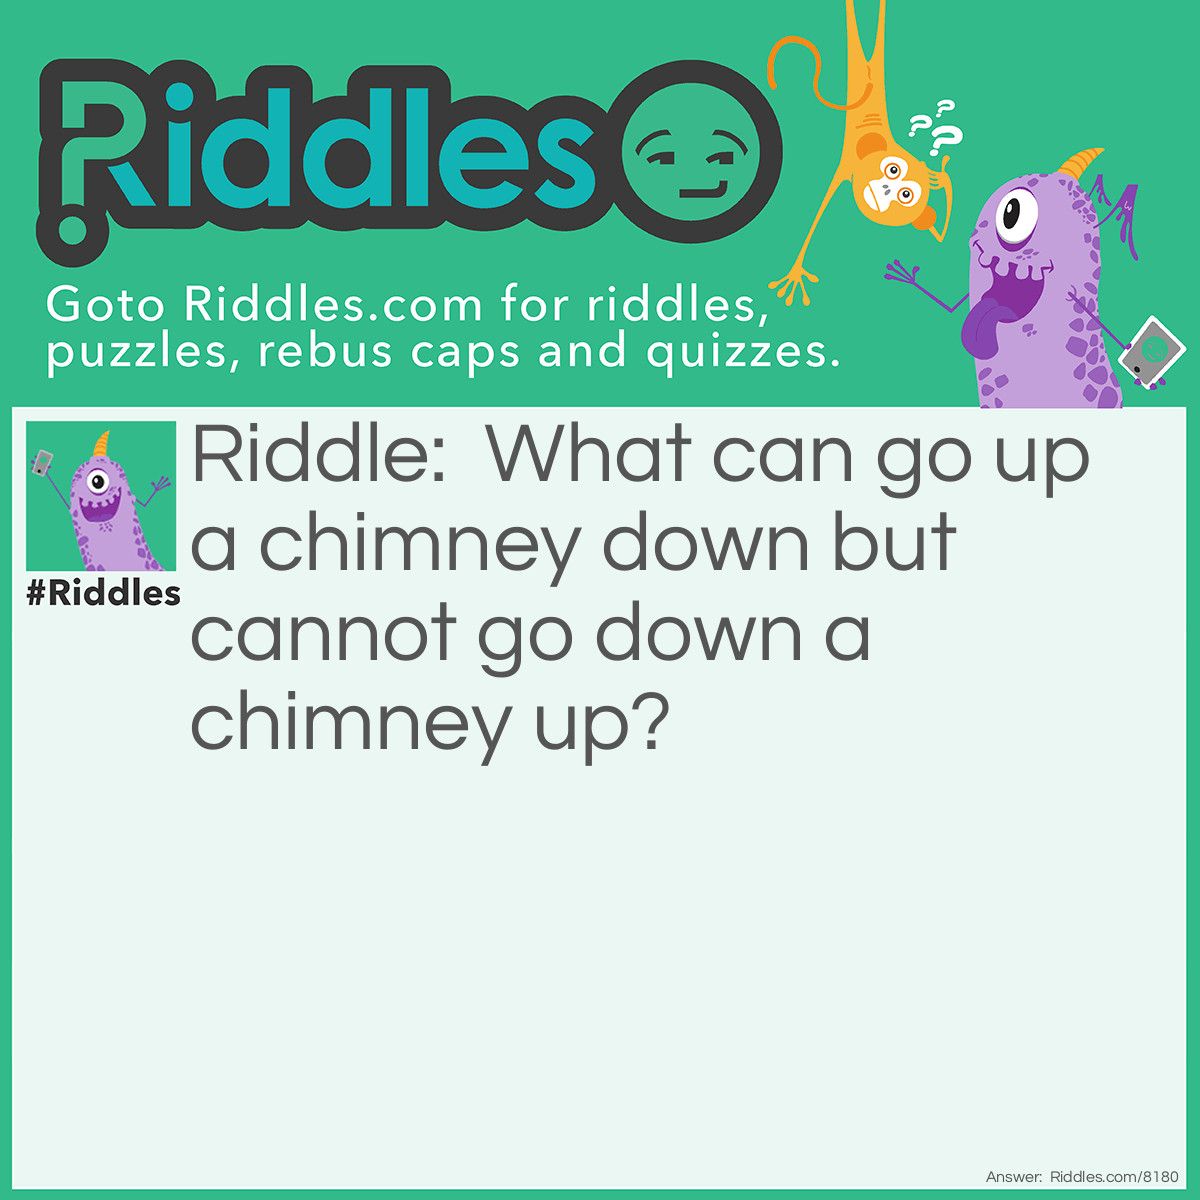 Riddle: What can go up a chimney down but cannot go down a chimney up? Answer: Umbrella.